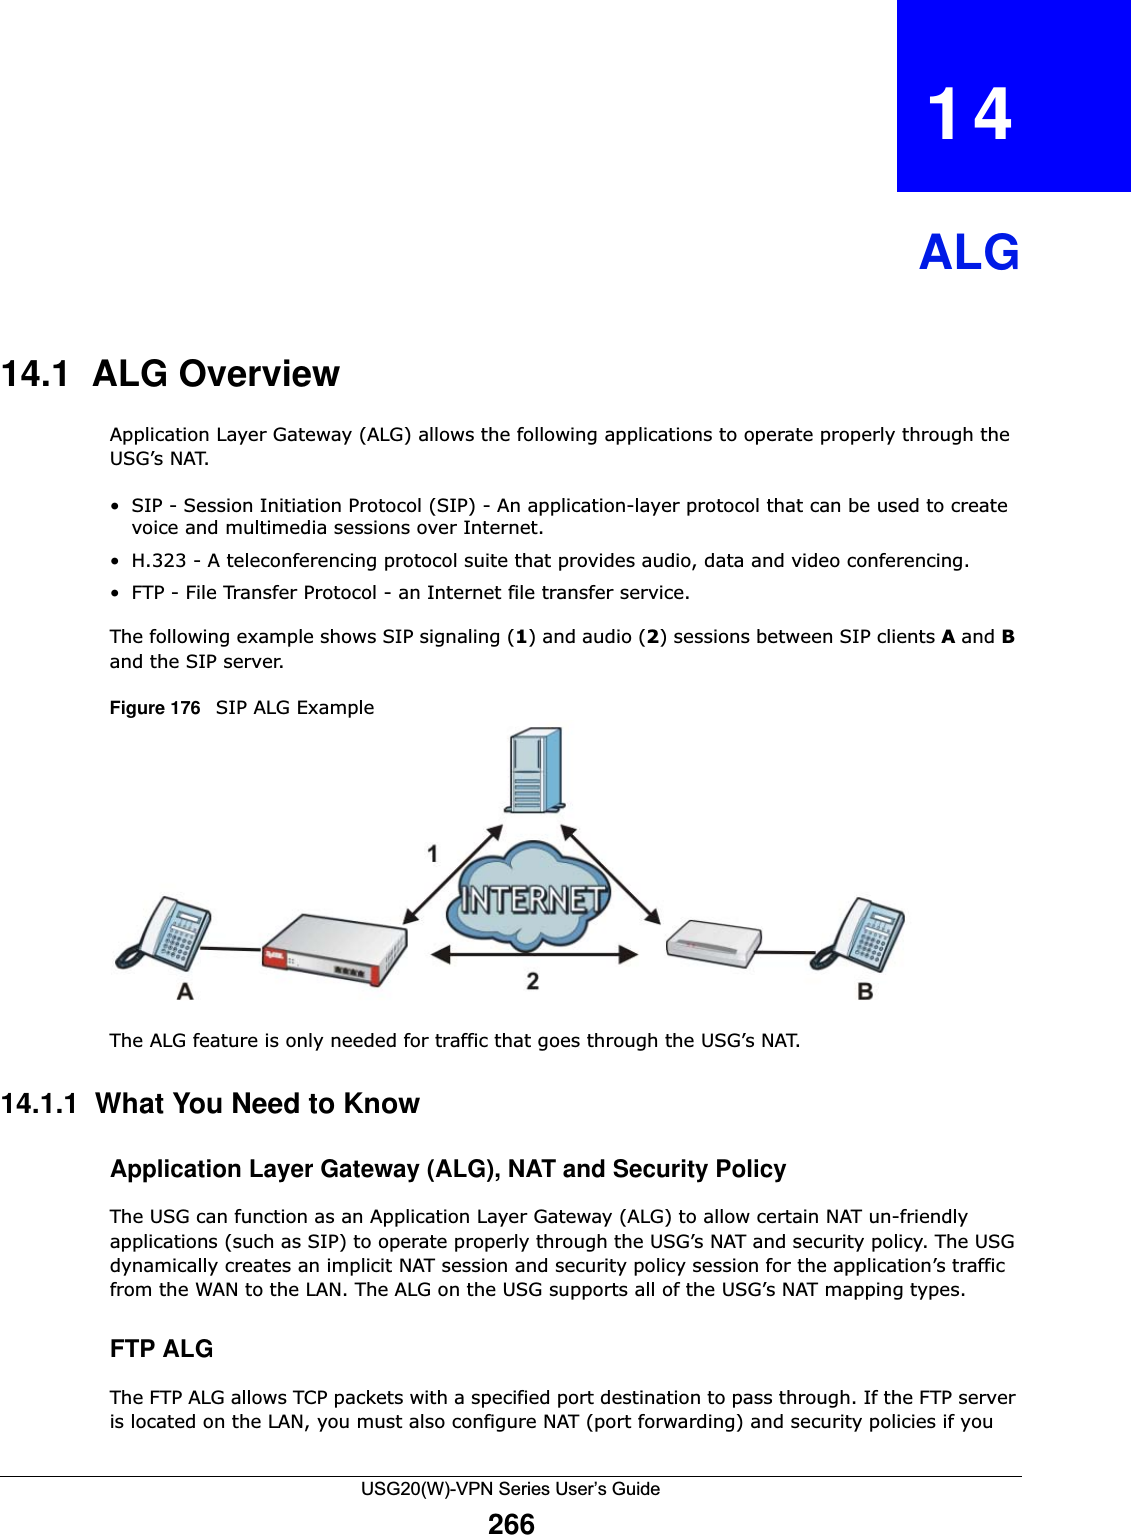 USG20(W)-VPN Series User’s Guide266CHAPTER   14ALG14.1  ALG OverviewApplication Layer Gateway (ALG) allows the following applications to operate properly through the USG’s NAT.• SIP - Session Initiation Protocol (SIP) - An application-layer protocol that can be used to create voice and multimedia sessions over Internet.• H.323 - A teleconferencing protocol suite that provides audio, data and video conferencing.• FTP - File Transfer Protocol - an Internet file transfer service.The following example shows SIP signaling (1) and audio (2) sessions between SIP clients A and B and the SIP server. Figure 176   SIP ALG Example The ALG feature is only needed for traffic that goes through the USG’s NAT. 14.1.1  What You Need to KnowApplication Layer Gateway (ALG), NAT and Security PolicyThe USG can function as an Application Layer Gateway (ALG) to allow certain NAT un-friendly applications (such as SIP) to operate properly through the USG’s NAT and security policy. The USG dynamically creates an implicit NAT session and security policy session for the application’s traffic from the WAN to the LAN. The ALG on the USG supports all of the USG’s NAT mapping types.FTP ALGThe FTP ALG allows TCP packets with a specified port destination to pass through. If the FTP server is located on the LAN, you must also configure NAT (port forwarding) and security policies if you 